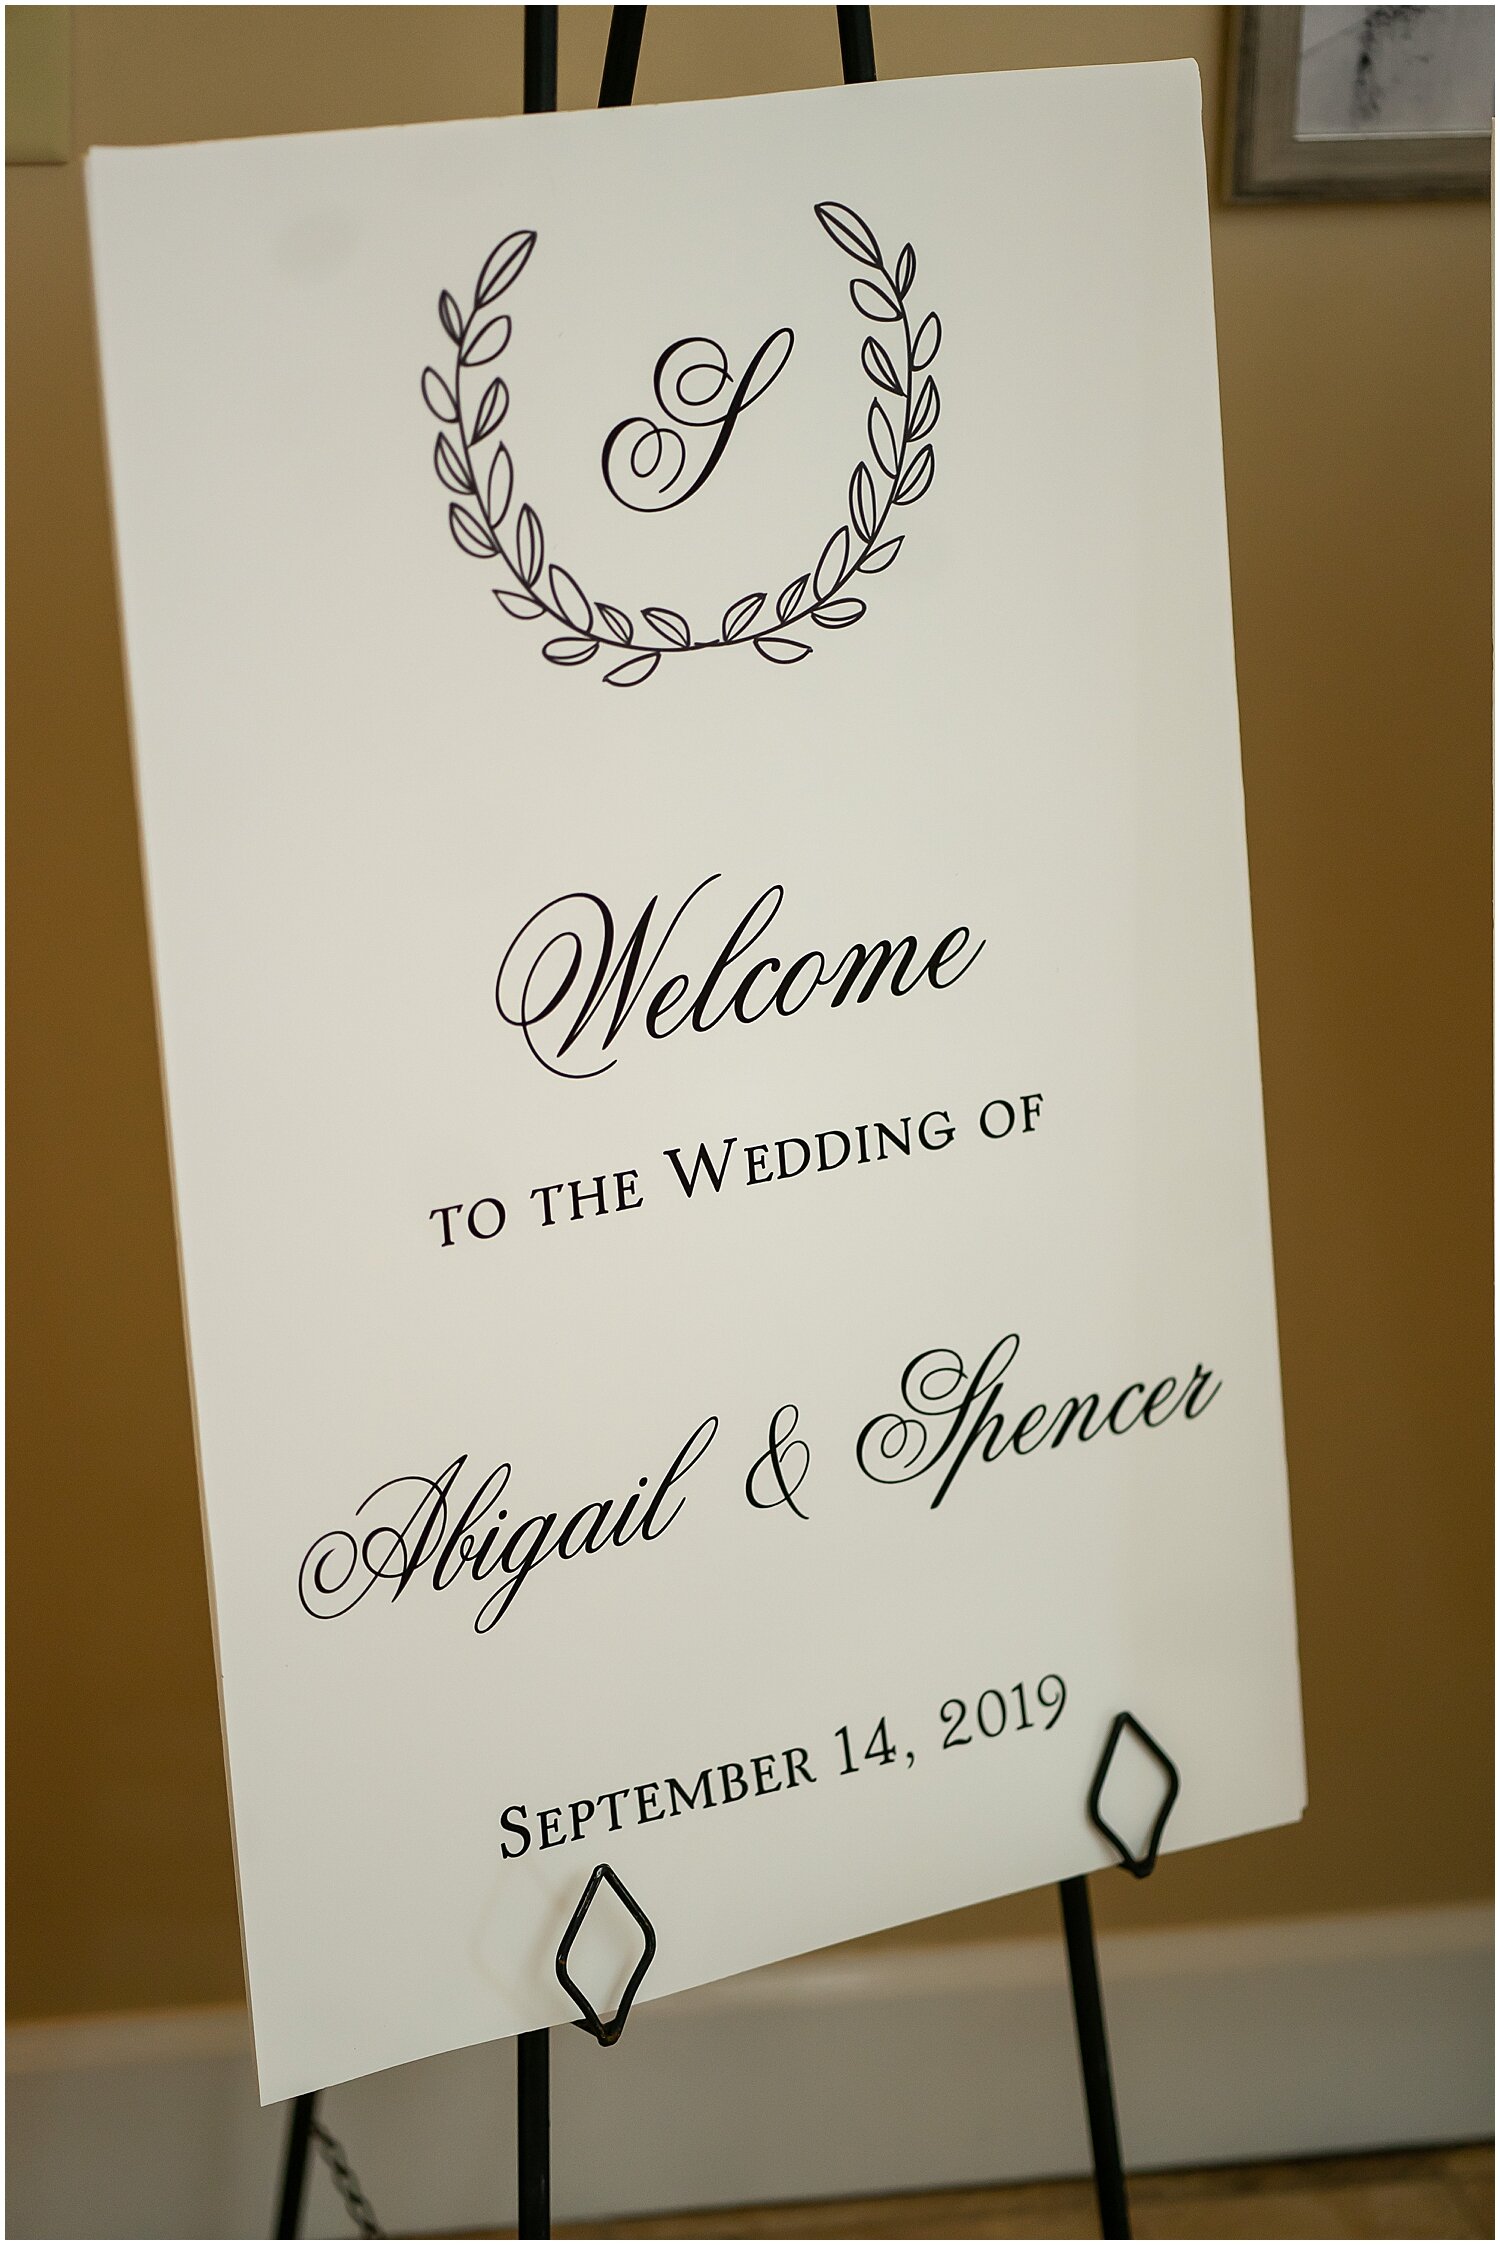  Welcome sign for wedding ceremony 